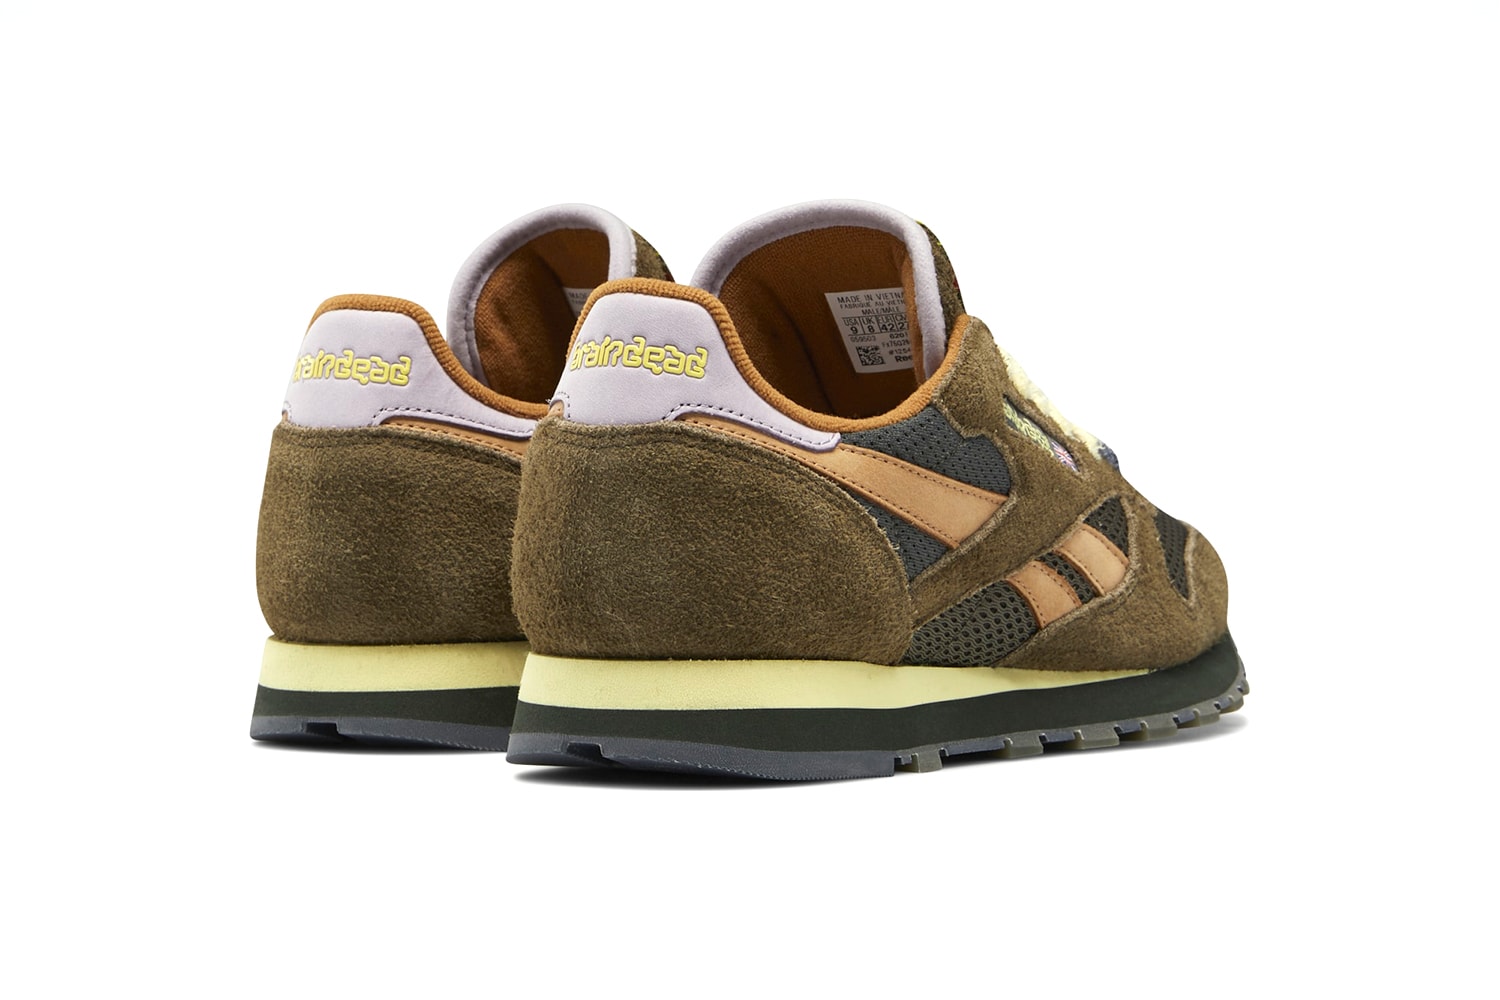 Brain Dead x Reebok Classic Leather Official Images release details info suede brown MOSS / SOFT CAMEL / FILTERED YELLOW FY0832